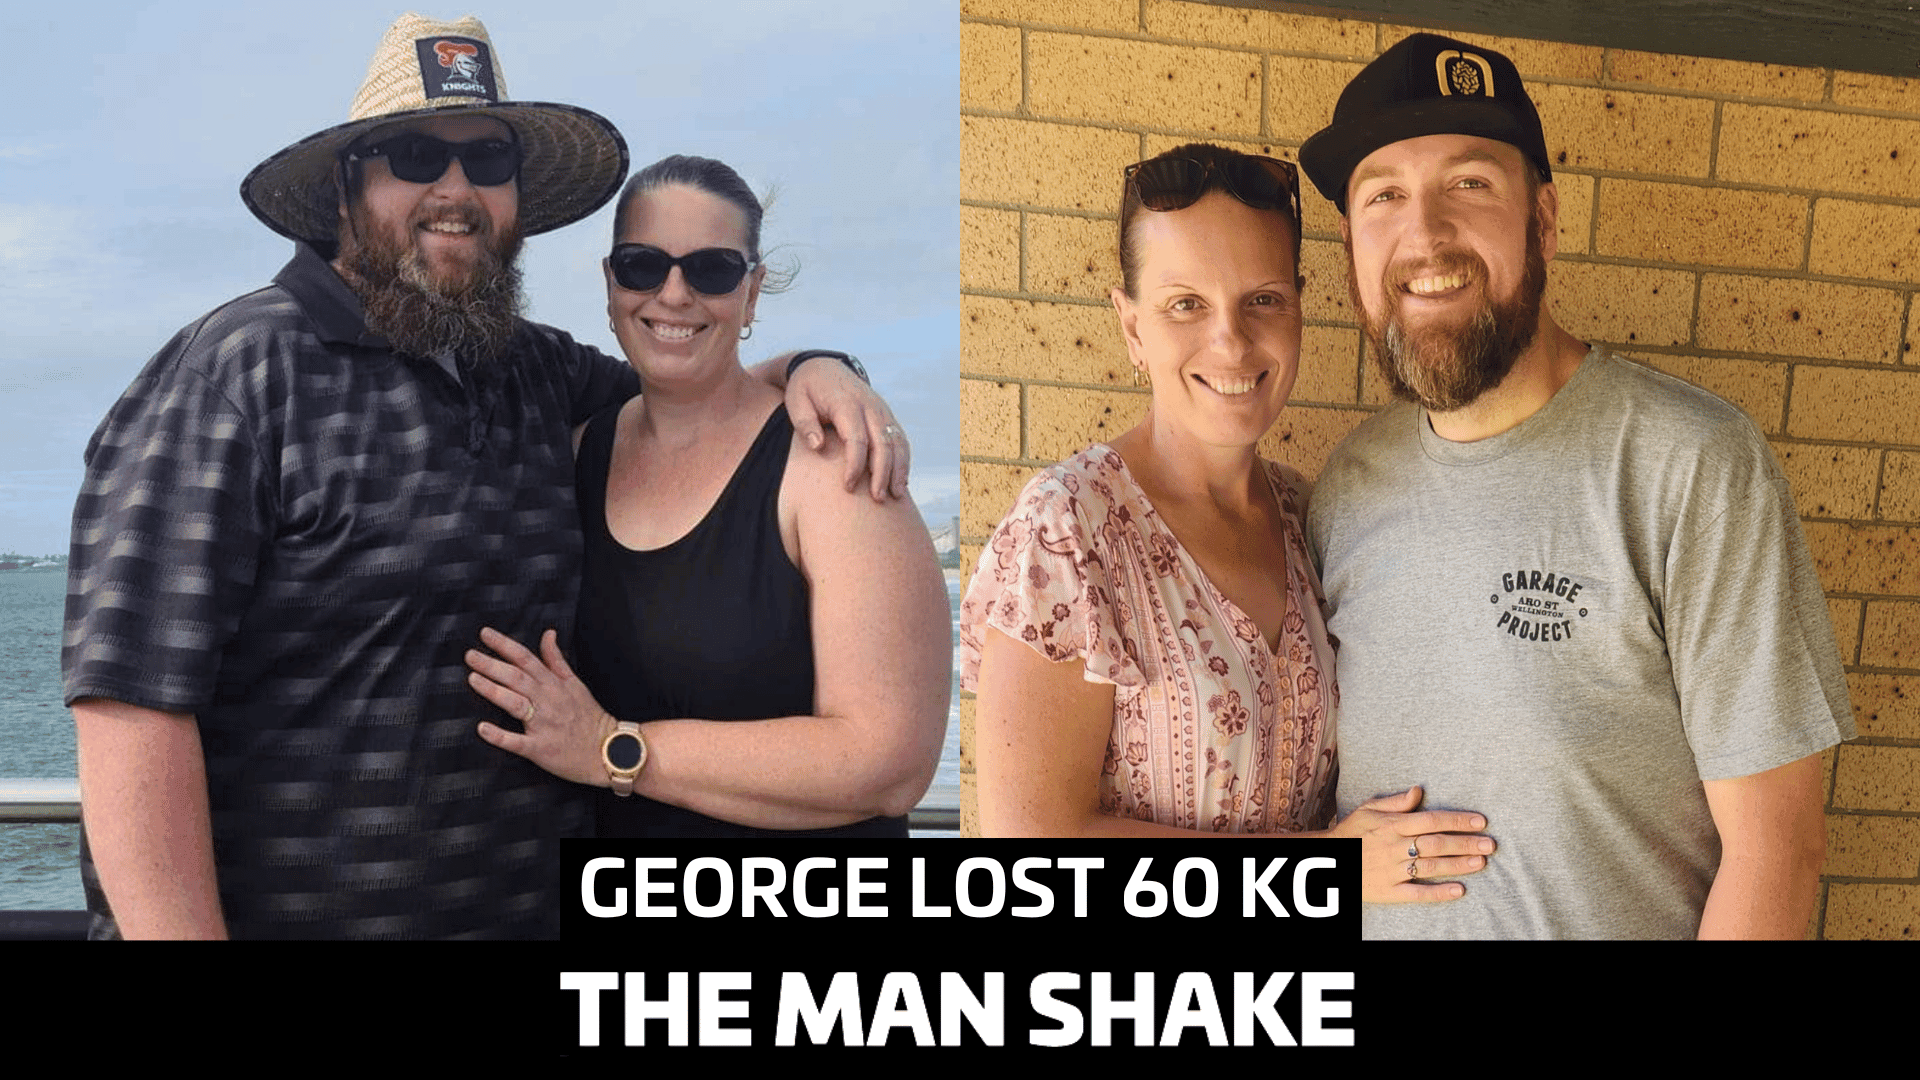 George started shaking with his wife and lost 60kgs!